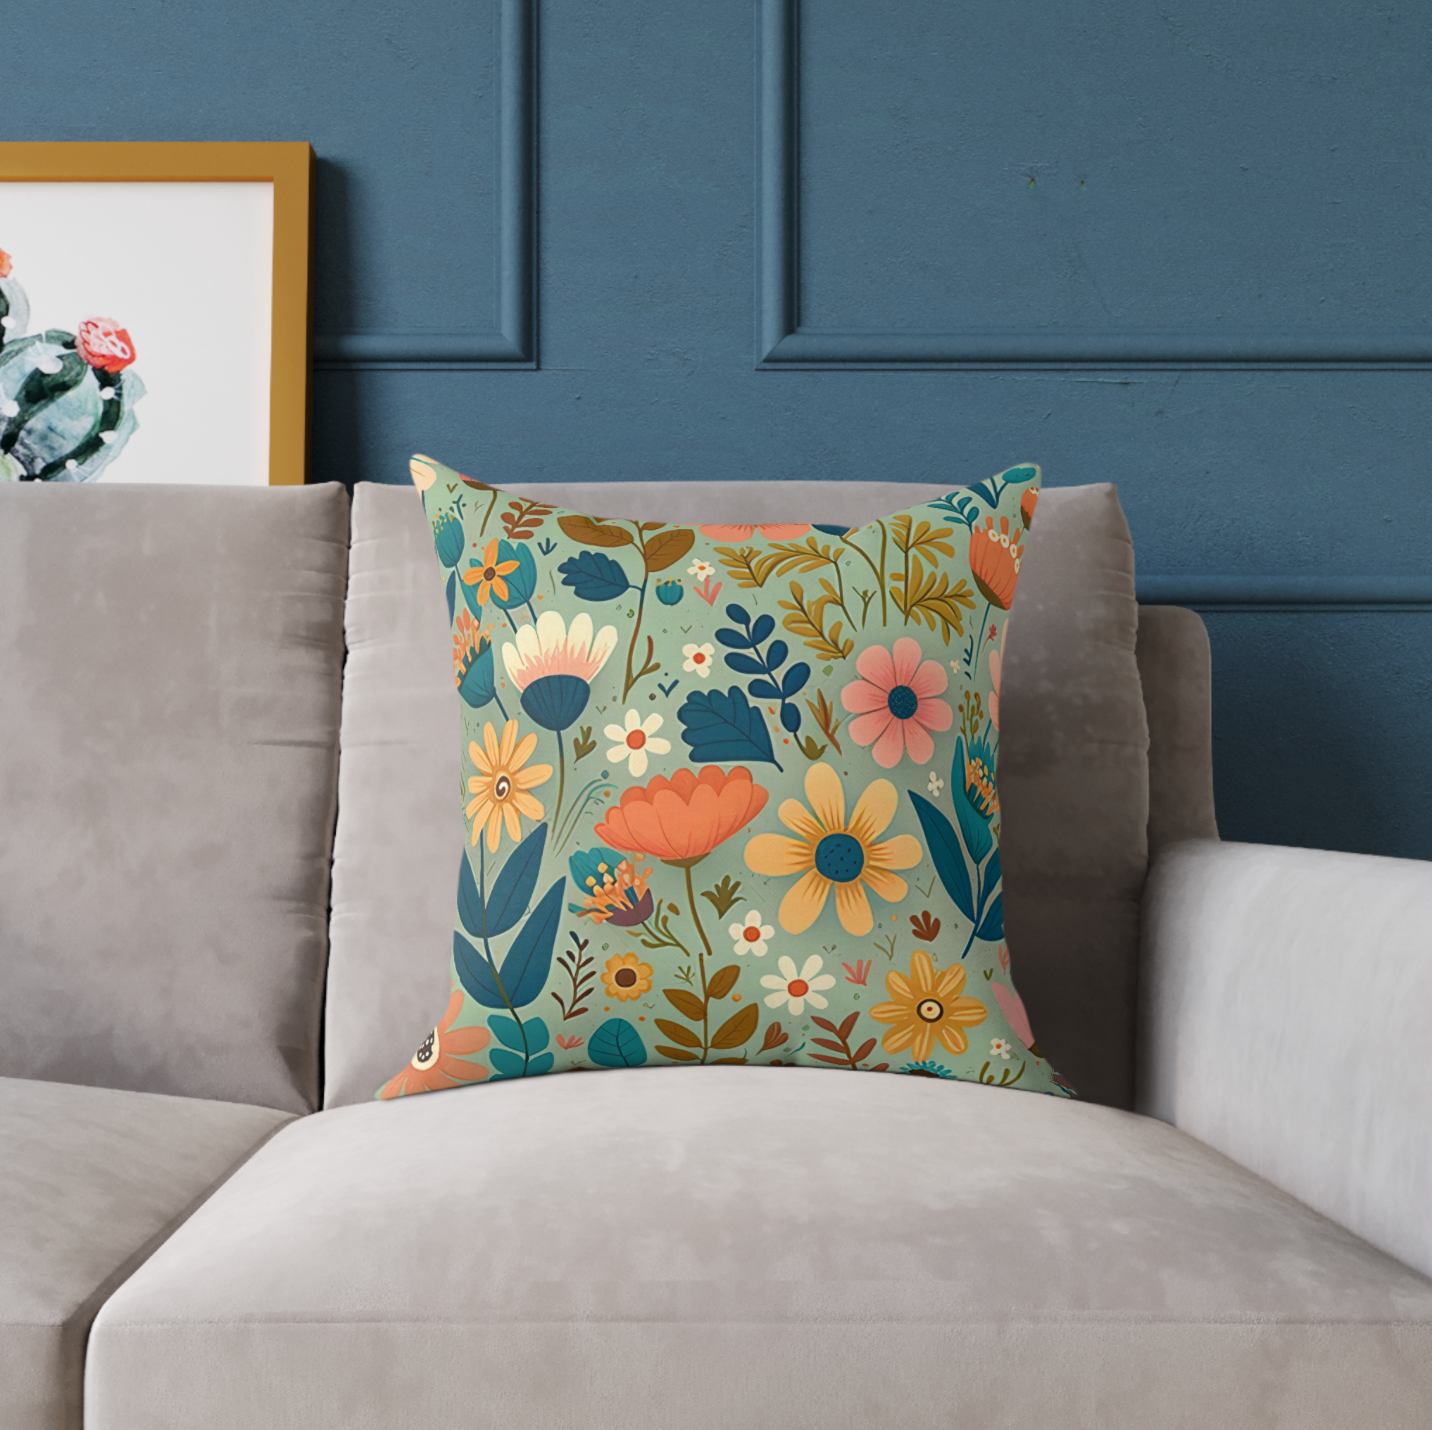 Yellow & Green floral accent throw pillow on a couch, Yellow & Green botanical couch pillow on a chair, Yellow & Green floral pattern pillow on a lounger, Yellow & Green spring garden floral decorative pillow on a bed